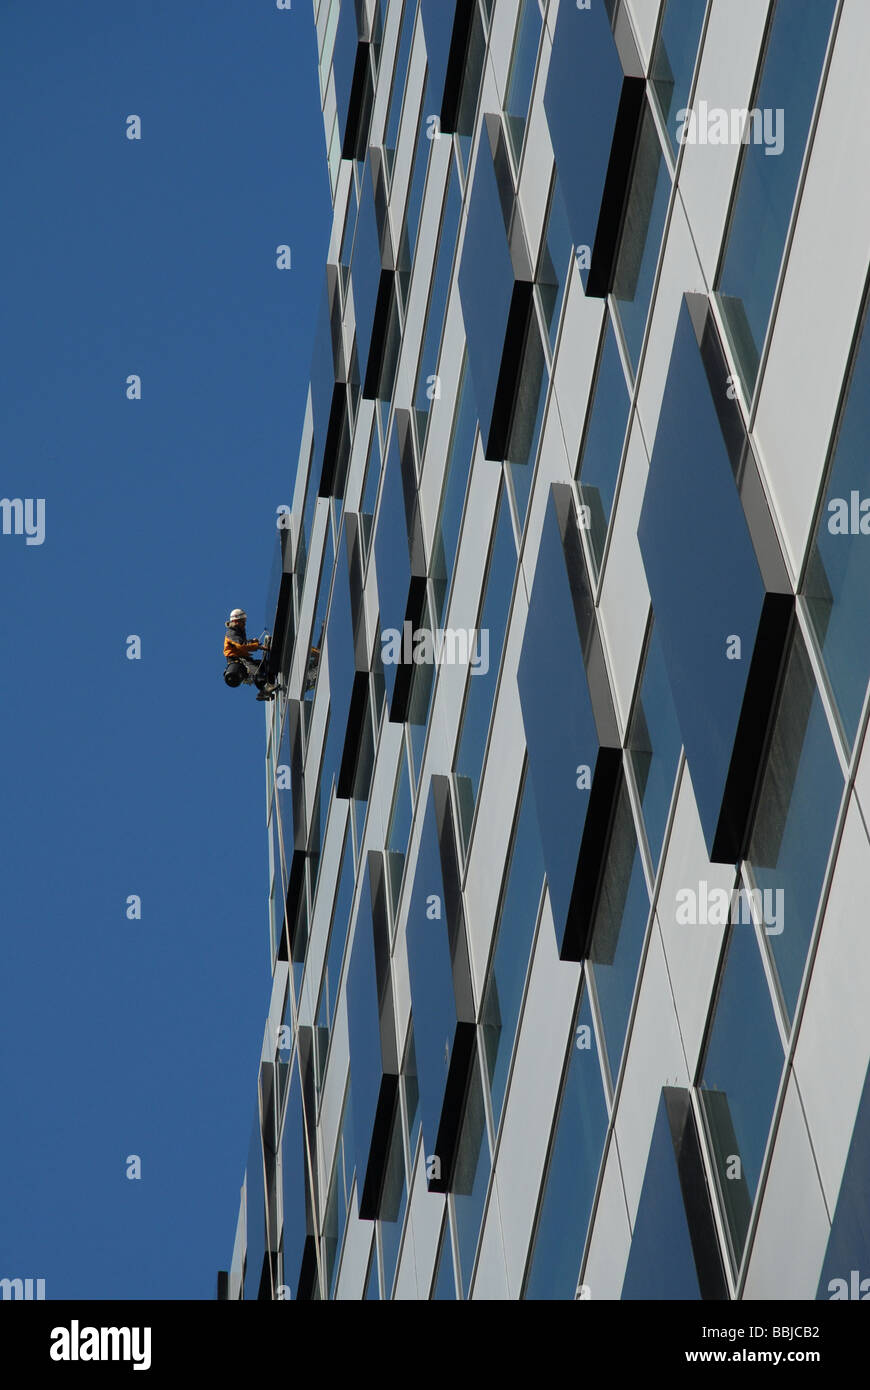 A window cleaner or washer works high up a tower block in the city Stock Photo